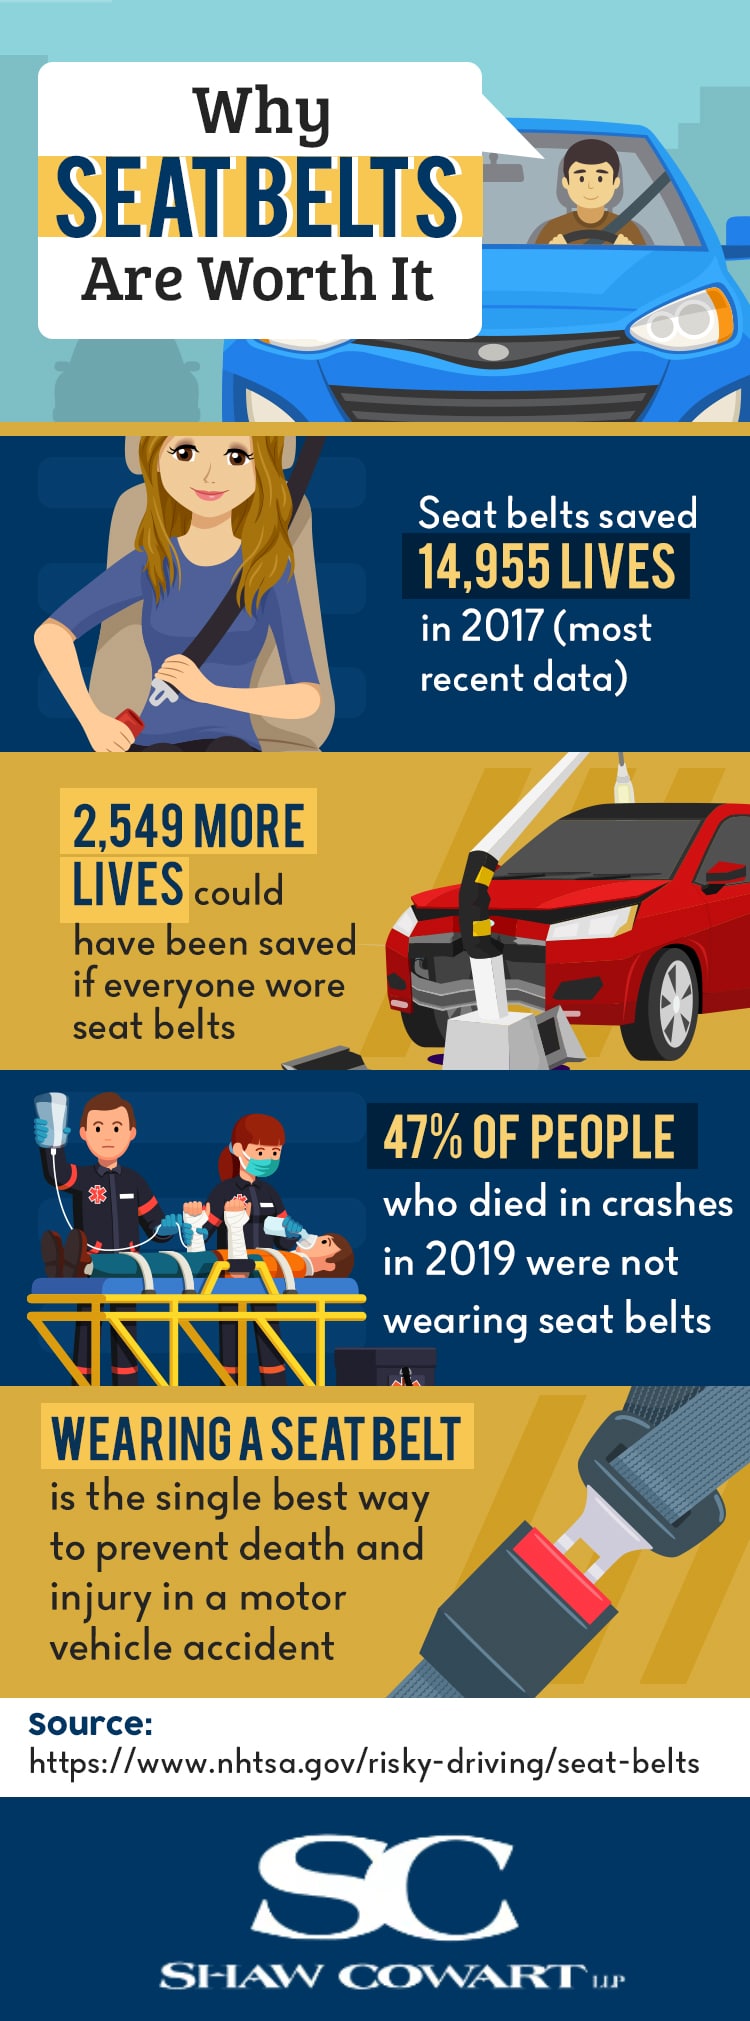 An infographic discussing why seat belts are important